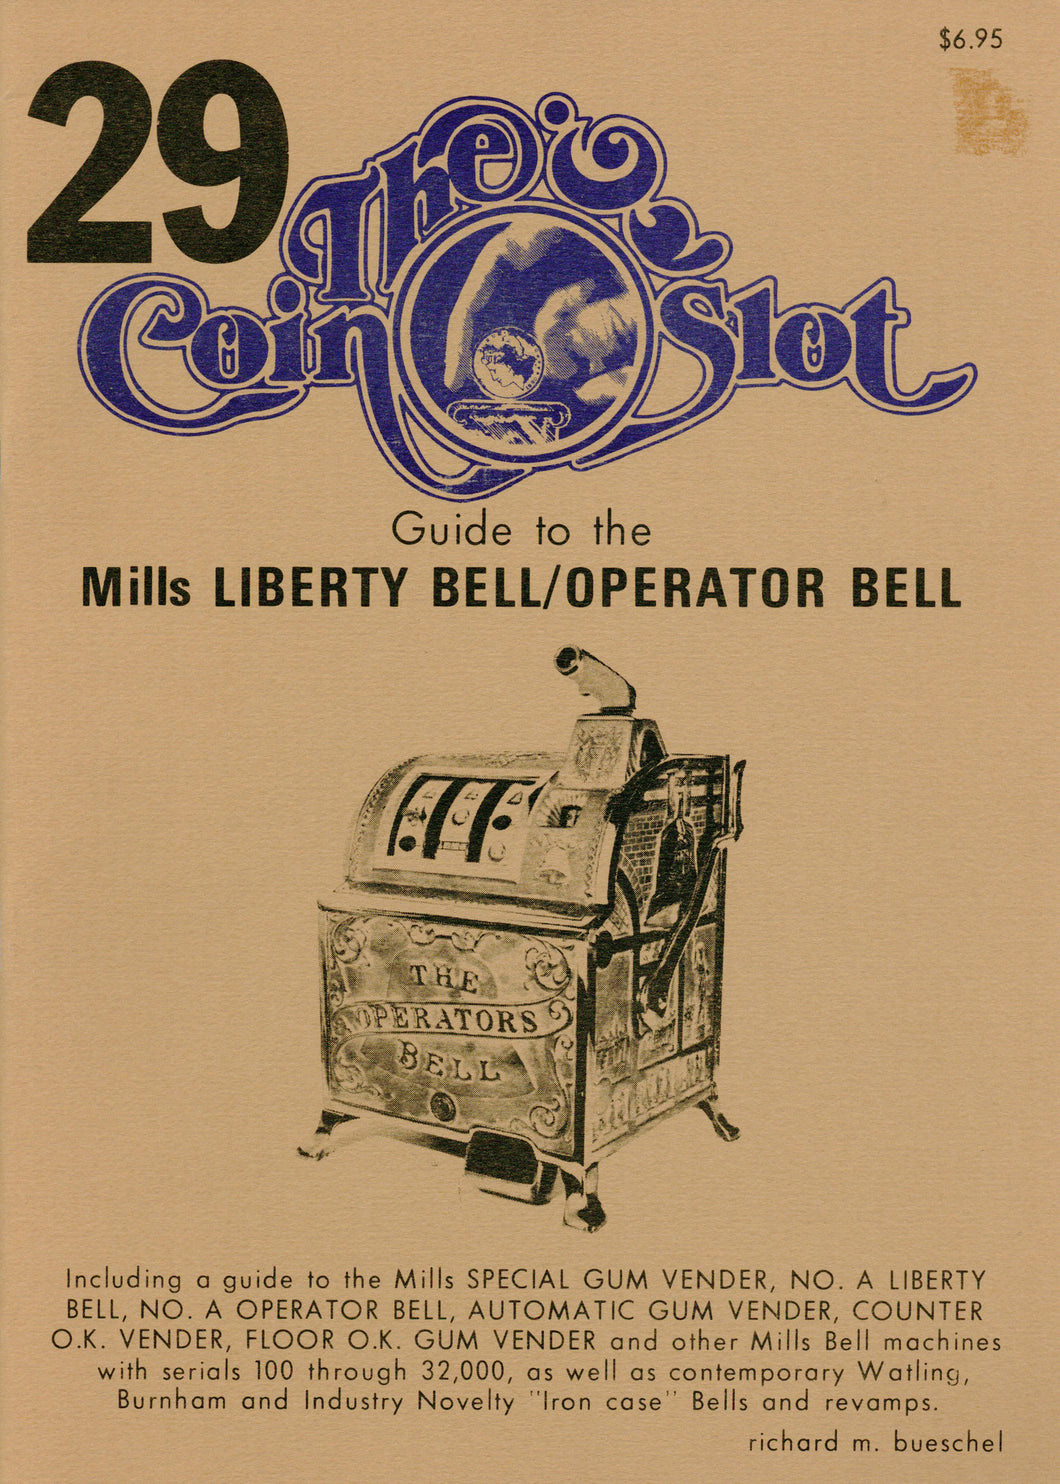 Coin Slot #29. Guide to the Mills Liberty Bell/Operator Bell